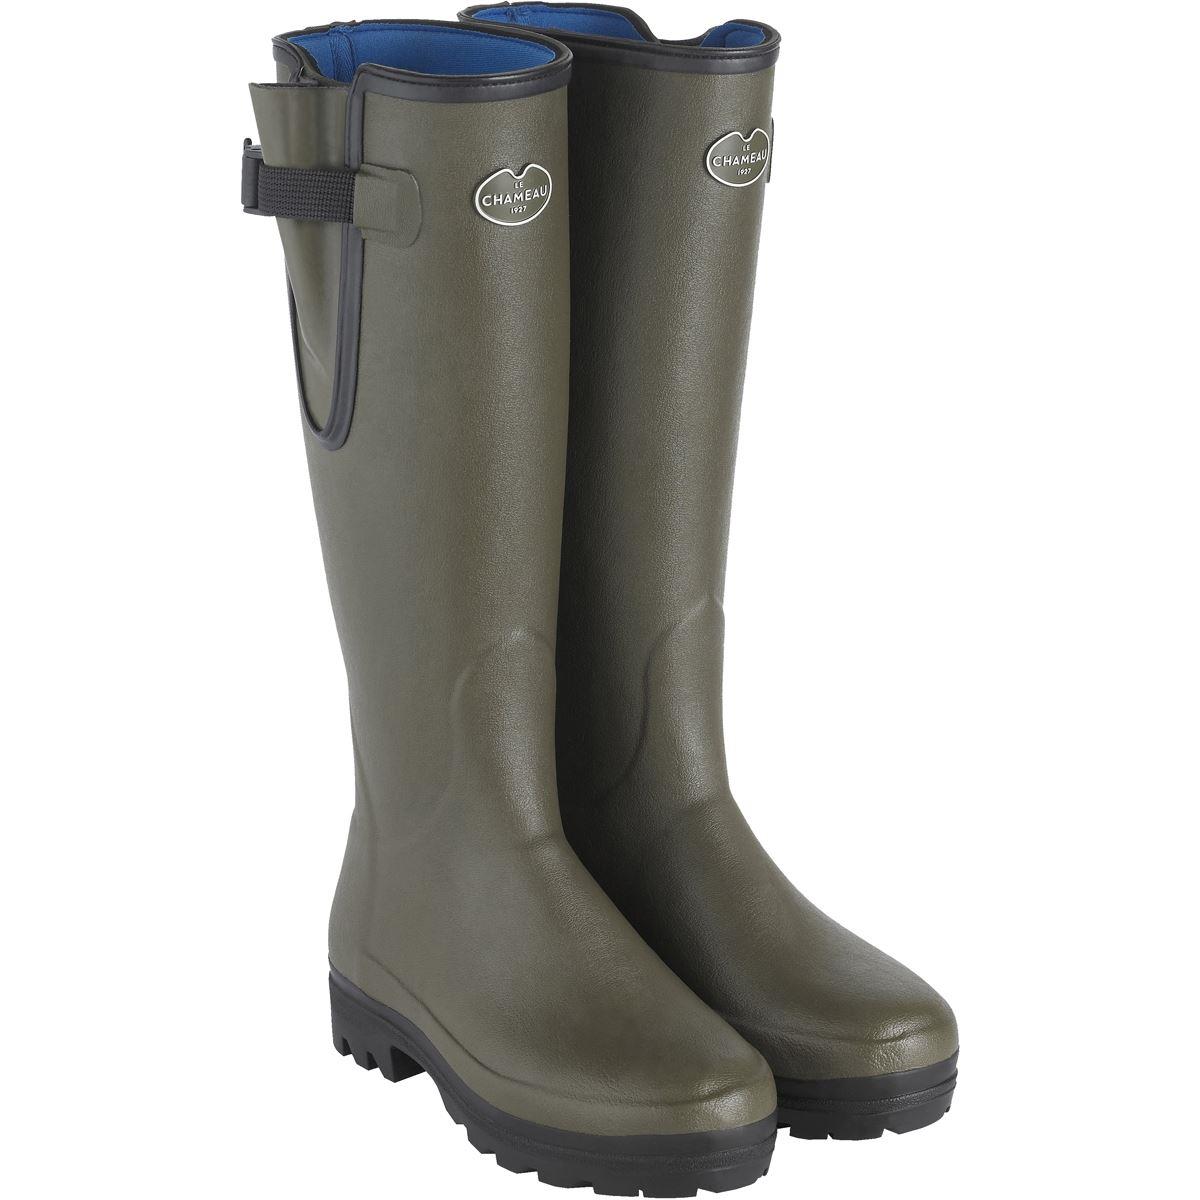 Are Le Chameau wellies made in France?